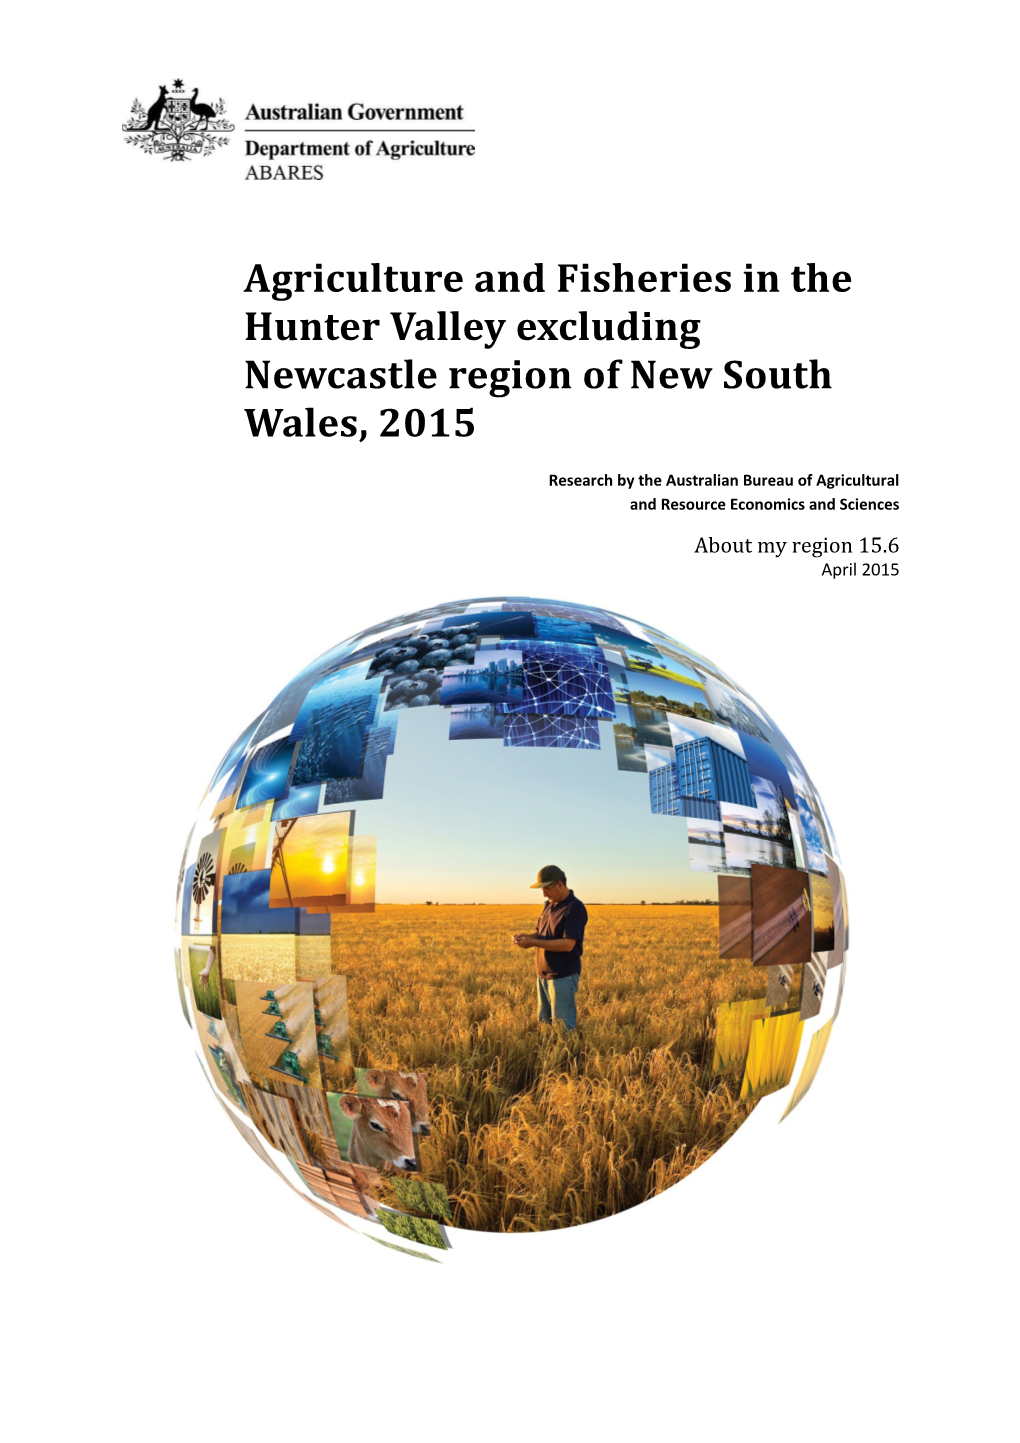 Agriculture and Fisheries in the Hunter Valley Excluding Newcastle Region of New South